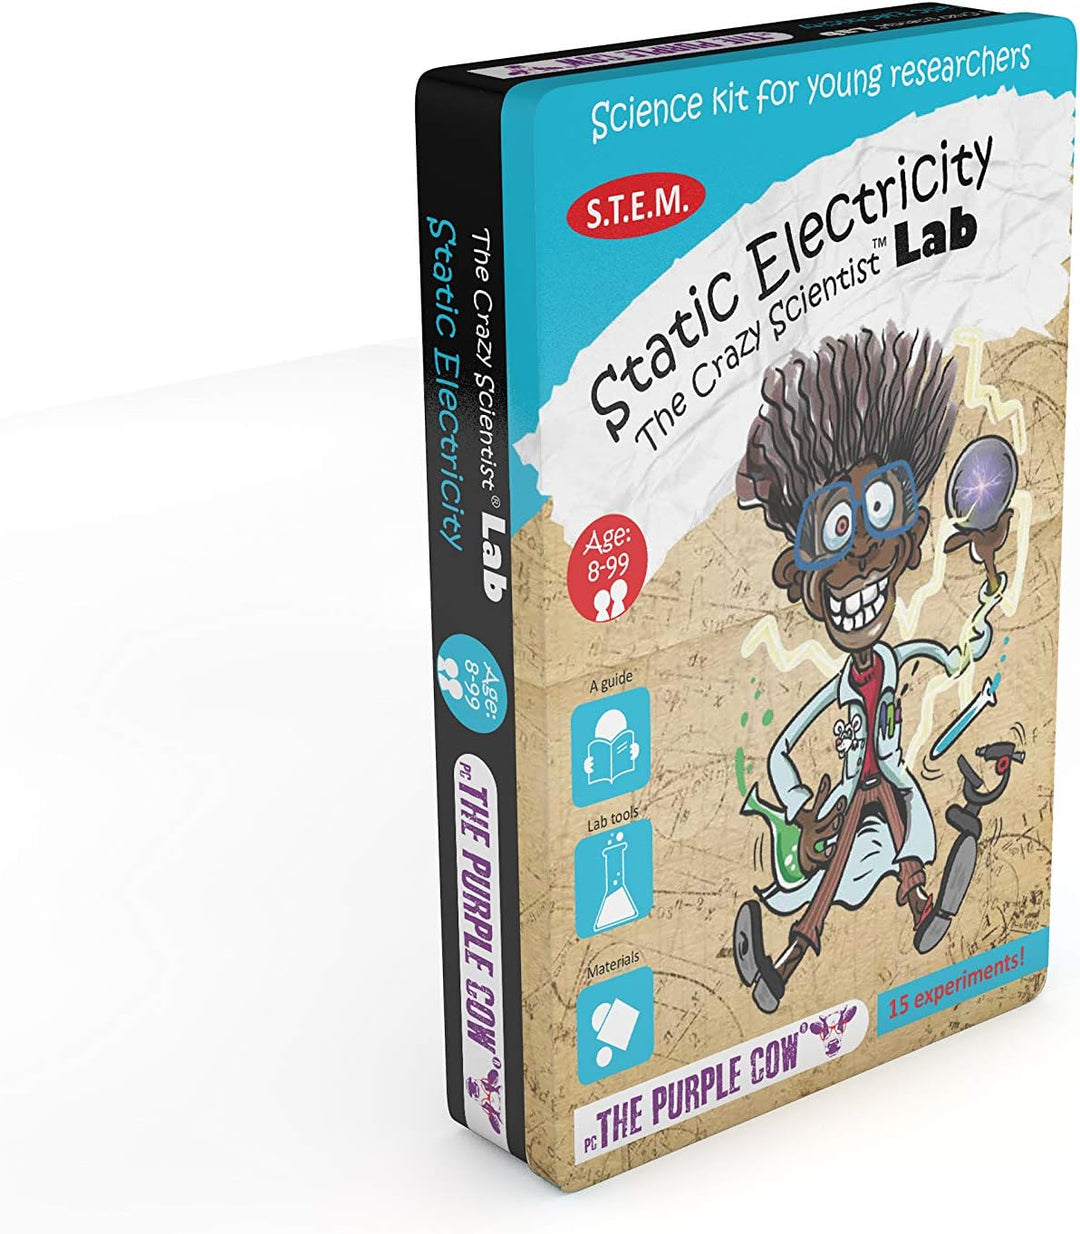 LAB Static Electricity Science Kit